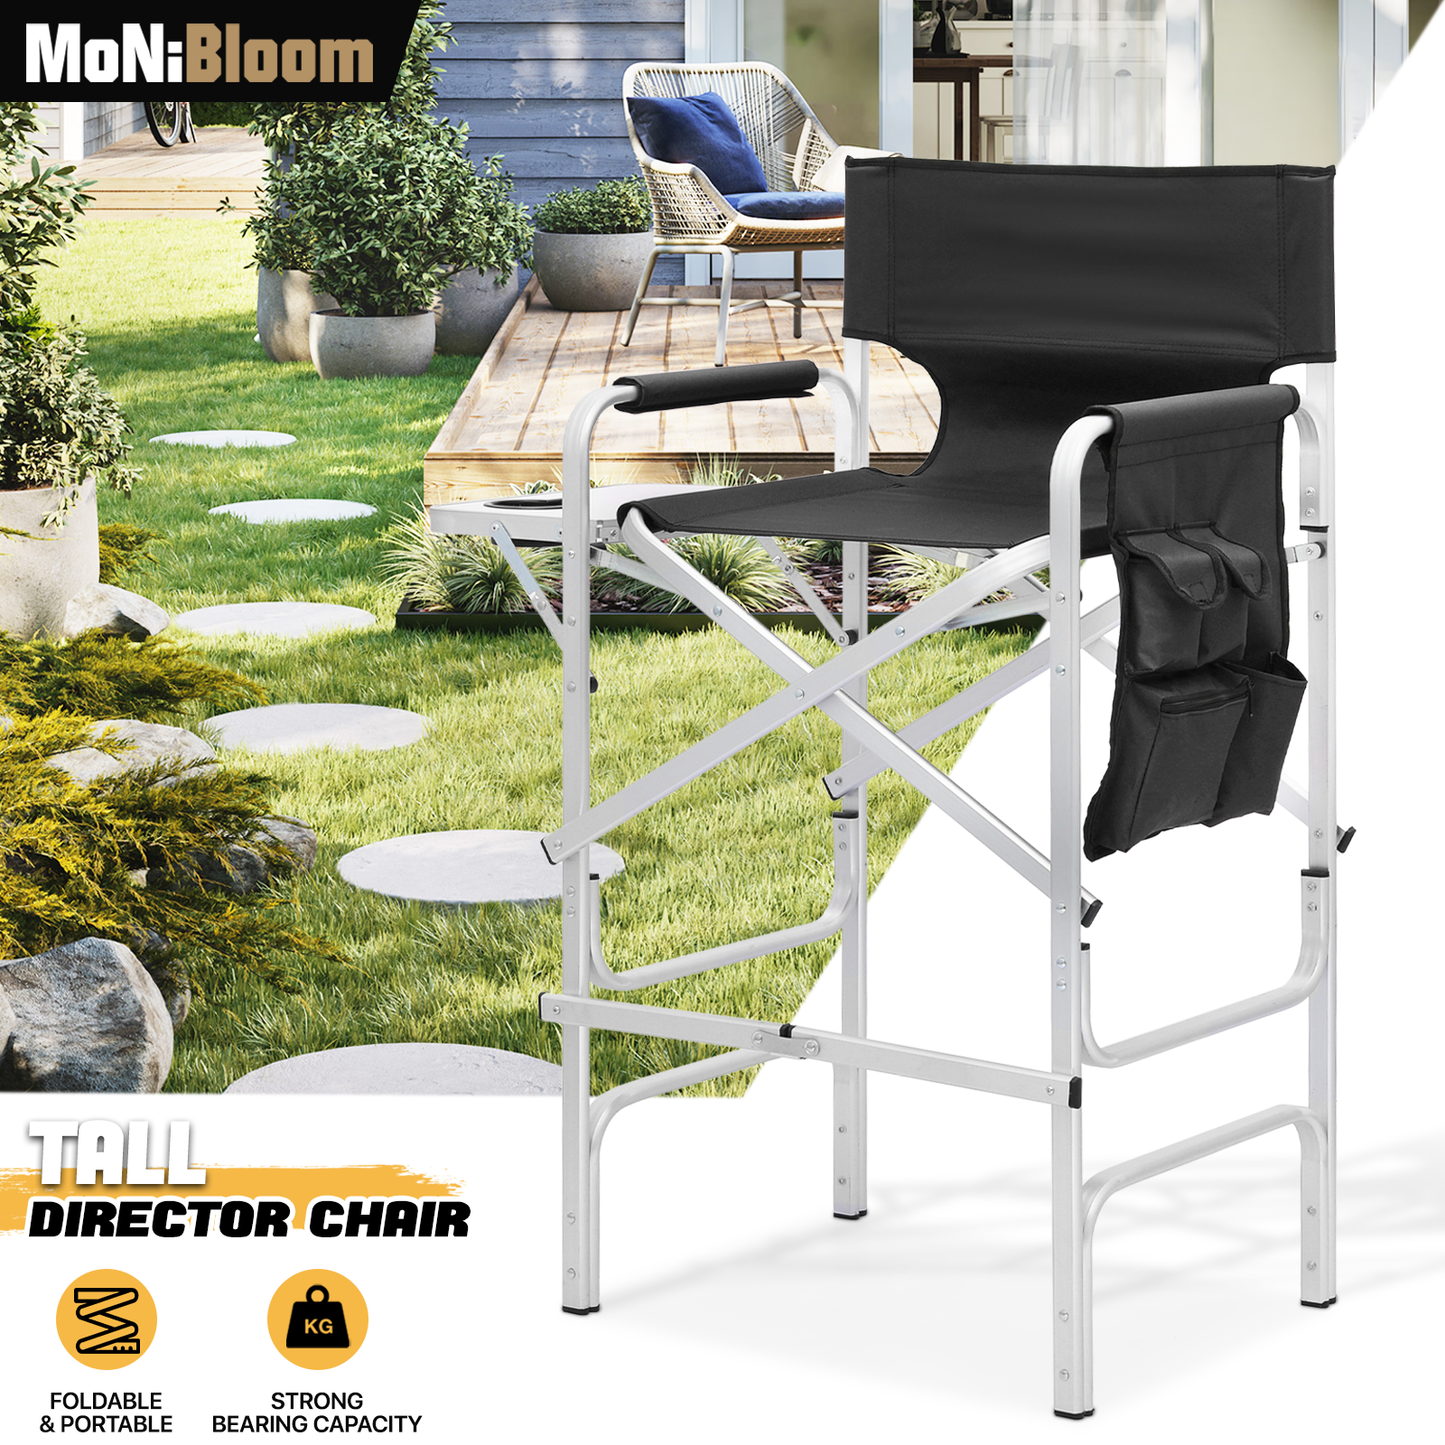 Foldable Director Chair-31" Seat Height-Cup Holder Tray+Side Pocket